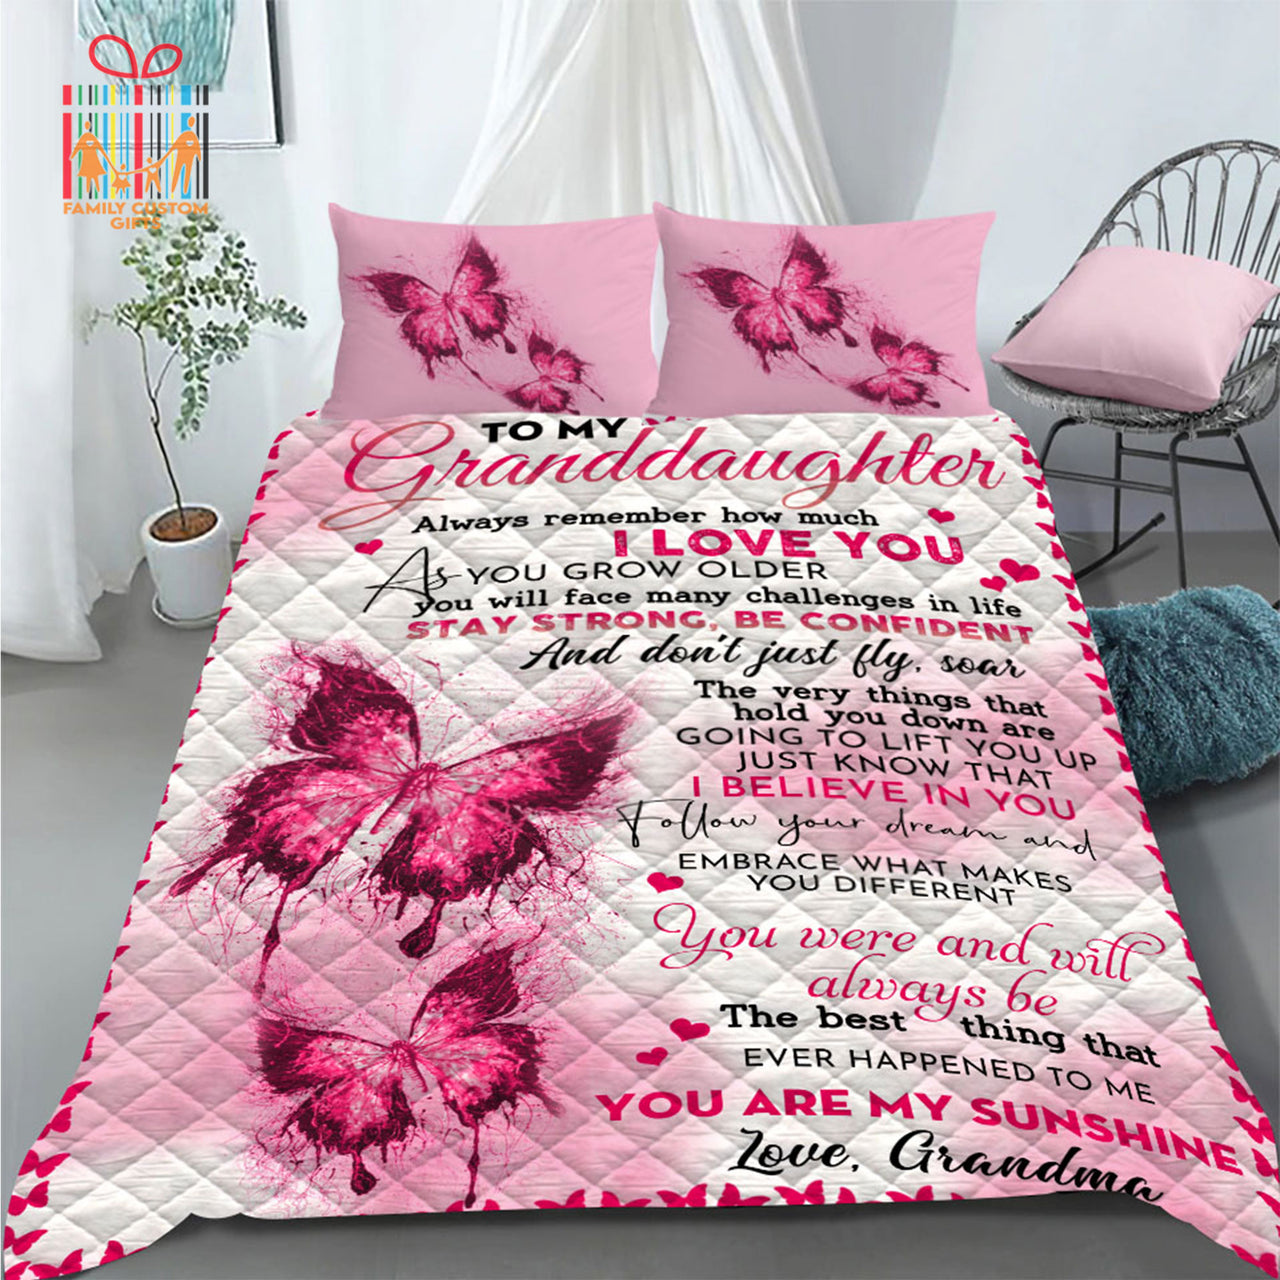 Comforter To My Granddaughter Custom Bedding Set for Kids Teens Adult Personalized Premium Bed Set